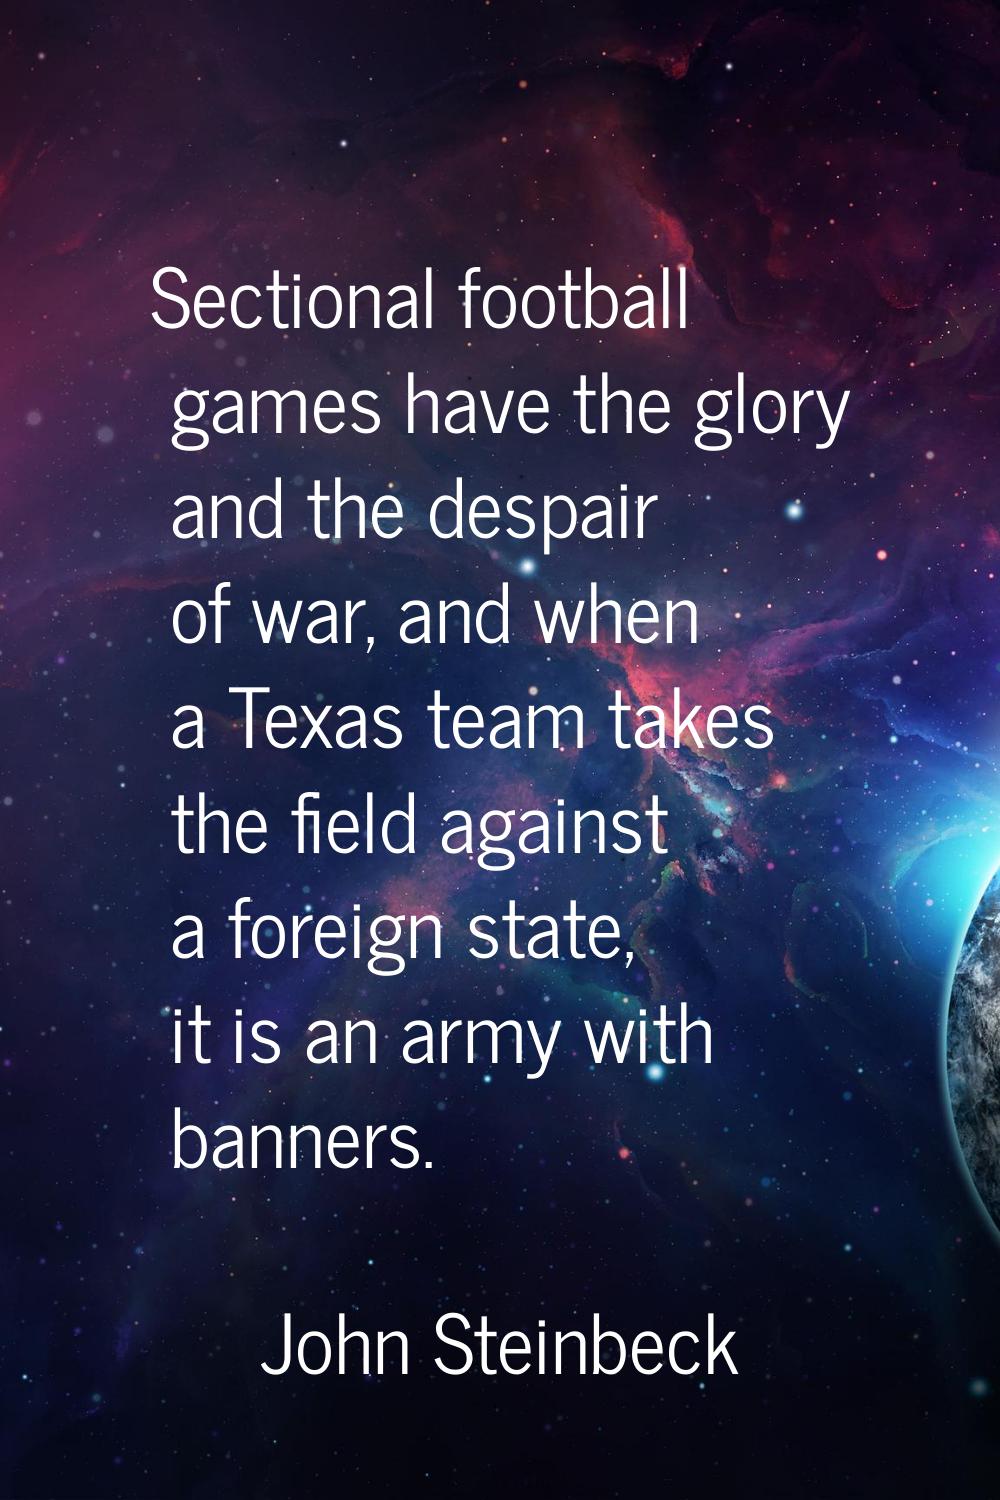 Sectional football games have the glory and the despair of war, and when a Texas team takes the fie